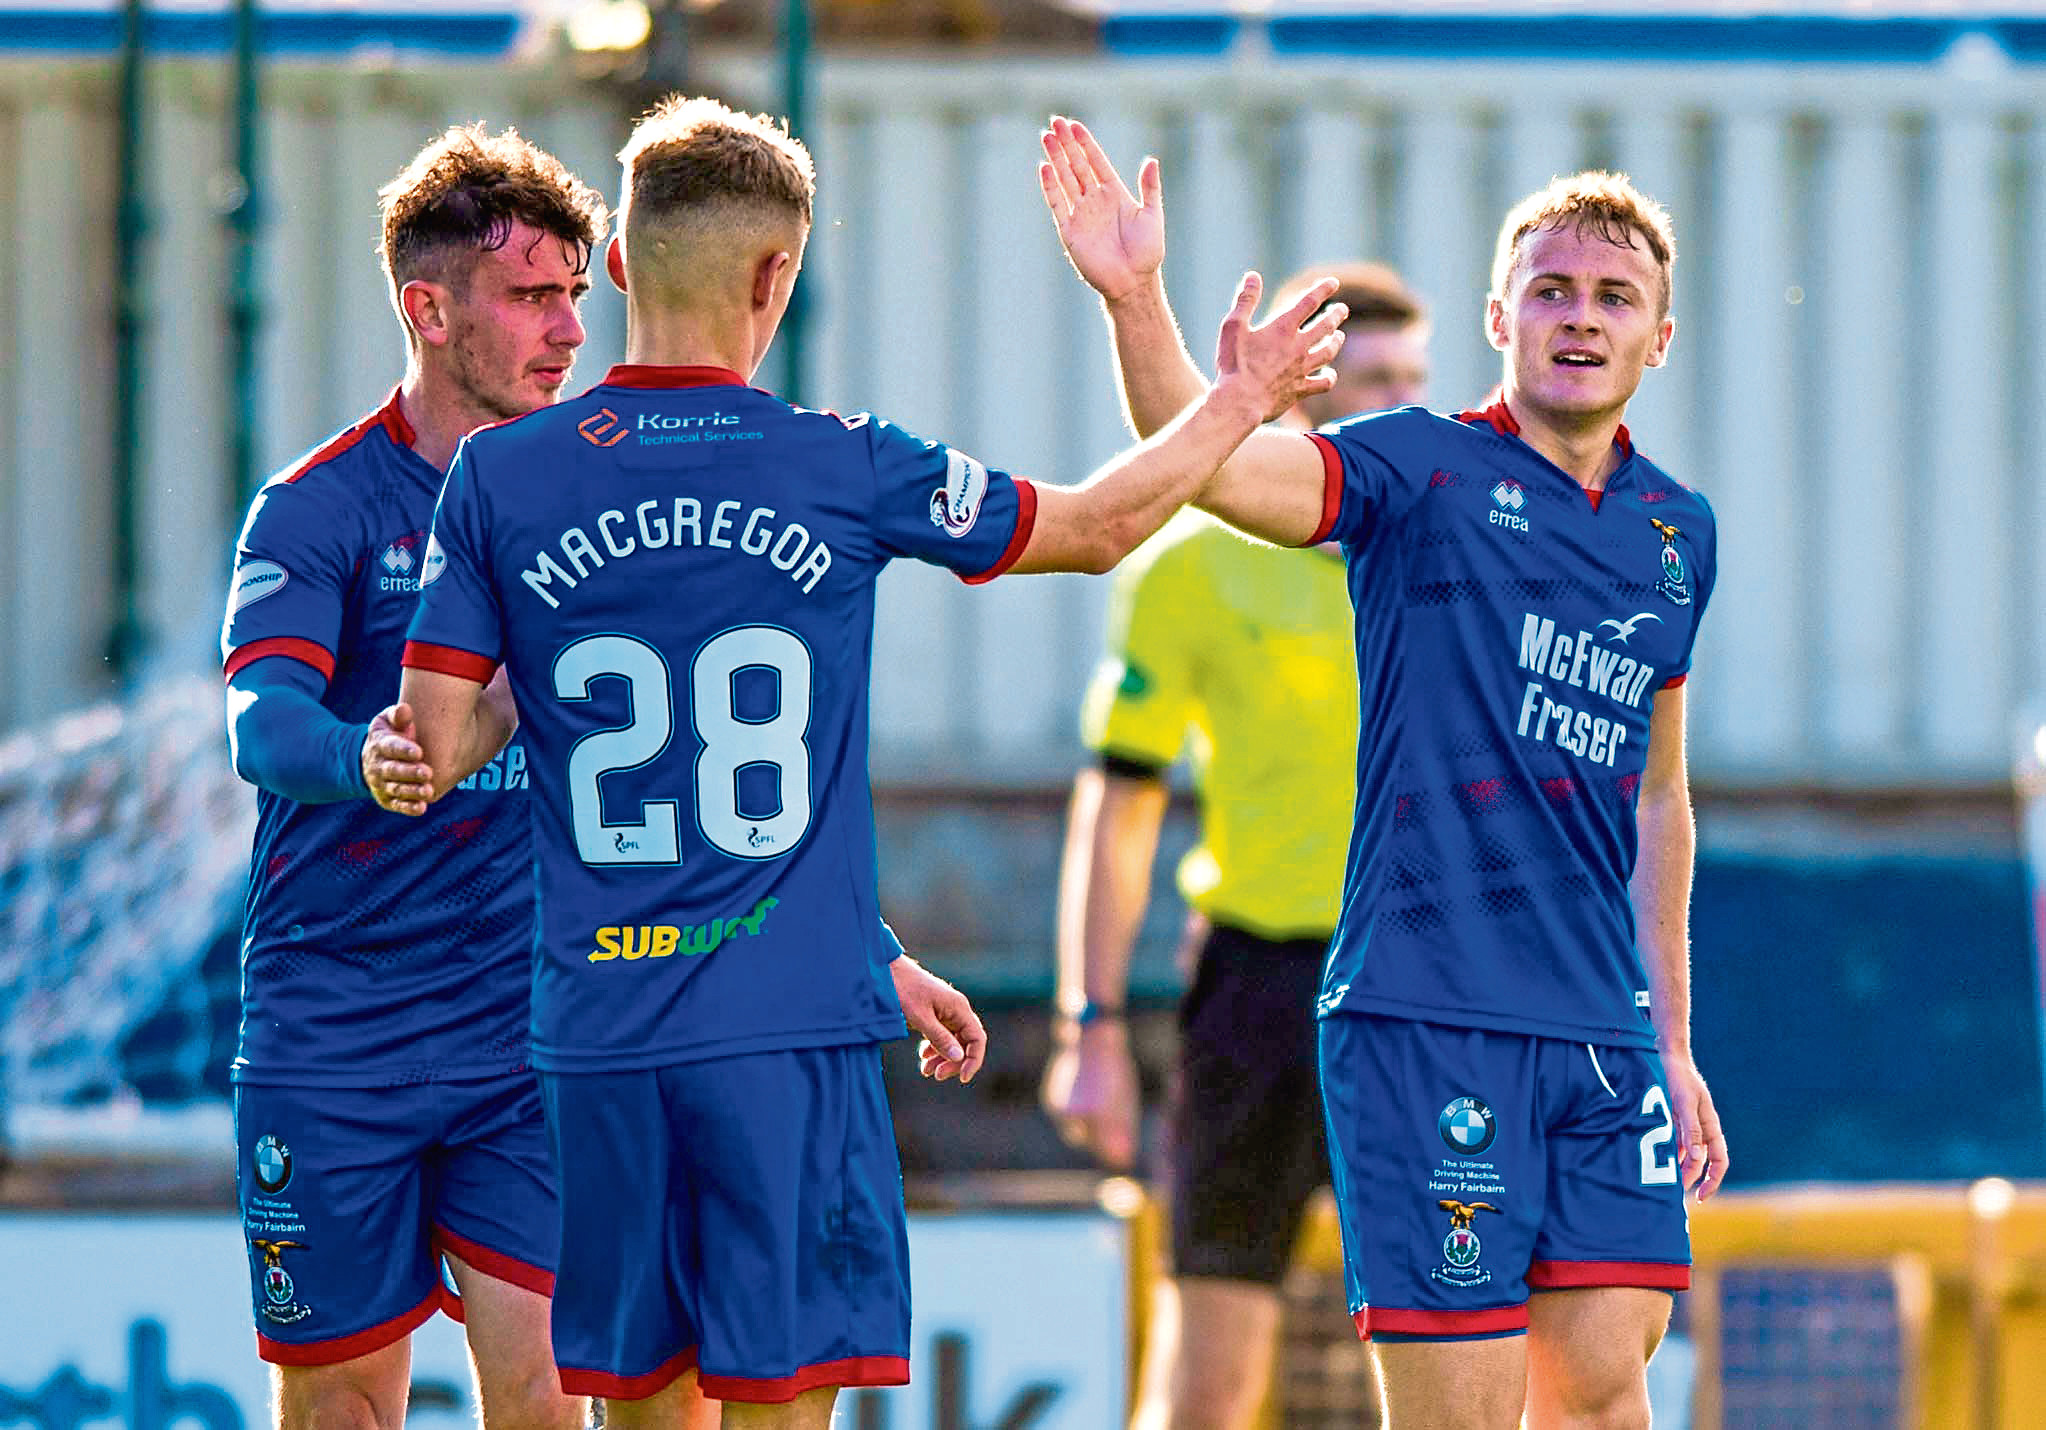 Mitch Curry, right, celebrates scoring with Roddy MacGregor during the Tunnocks Caramel Wafer Challenge Cup Last 16 match between Inverness CT and Alloa Athletic, on October 12, in Inverness, Scotland.